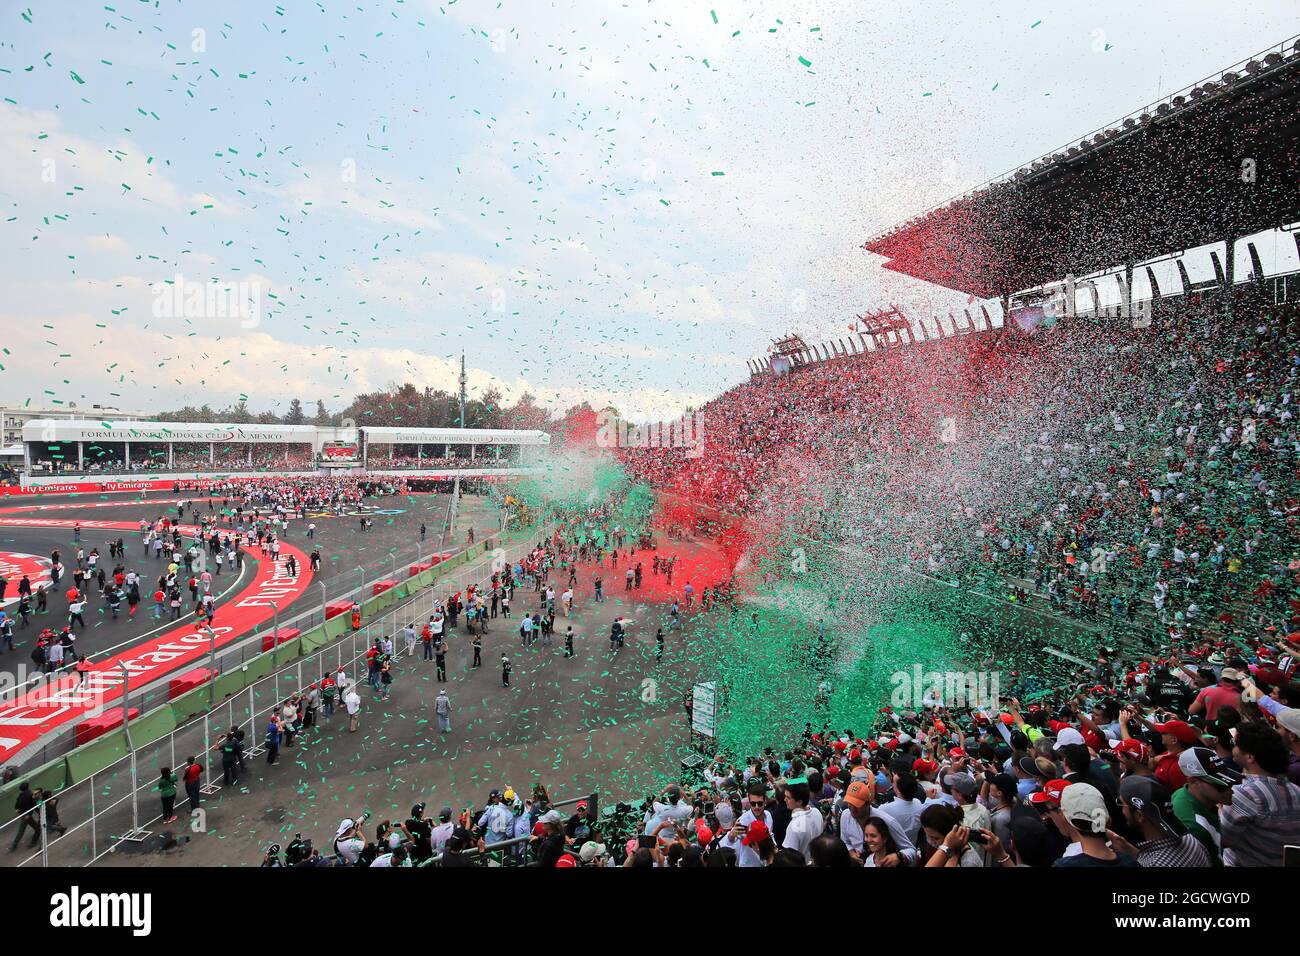 Ticker tape covers fans in the grandstand as the podium takes place. Mexican Grand Prix, Sunday 1st November 2015. Mexico City, Mexico. Stock Photo